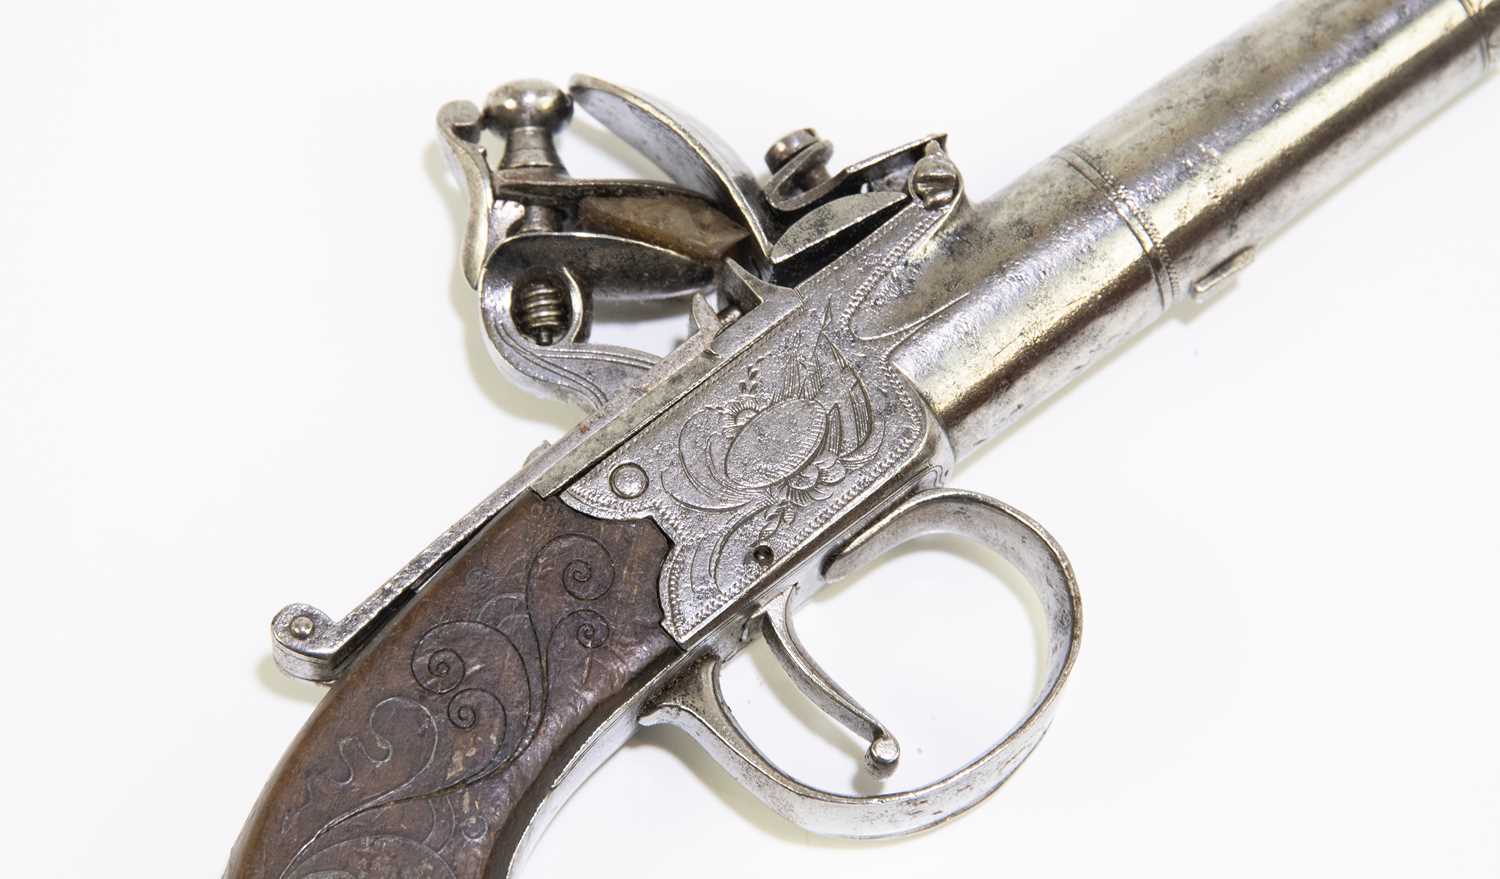 A late 18th/early 19th century flintlock muff pistol, the 1.5" screw-off barrel mounted to the - Image 2 of 4